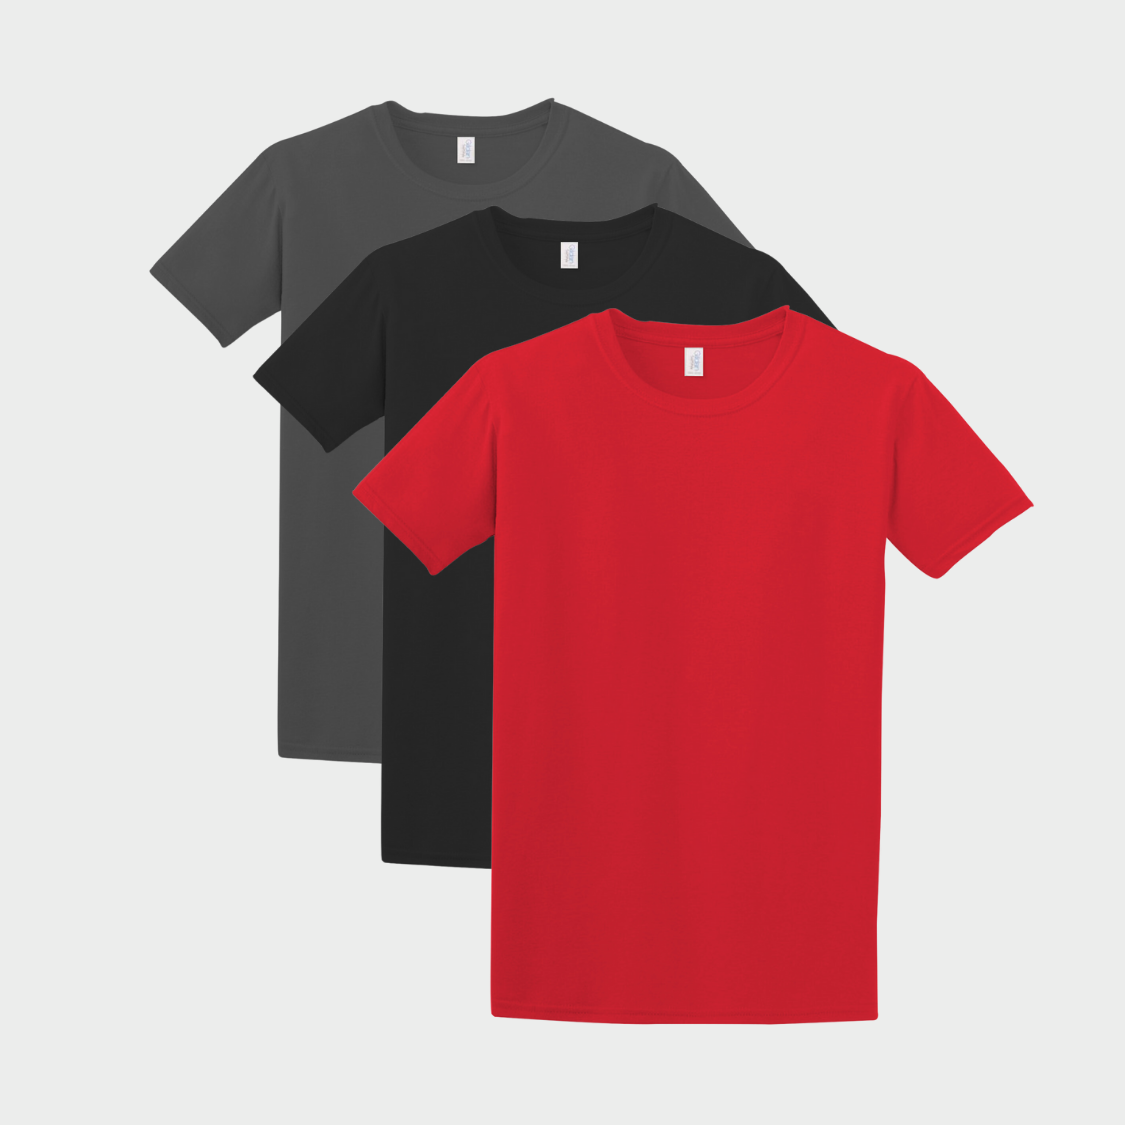 Pack of 3 solid t-shirts (Heather, Black, Red) Size XL